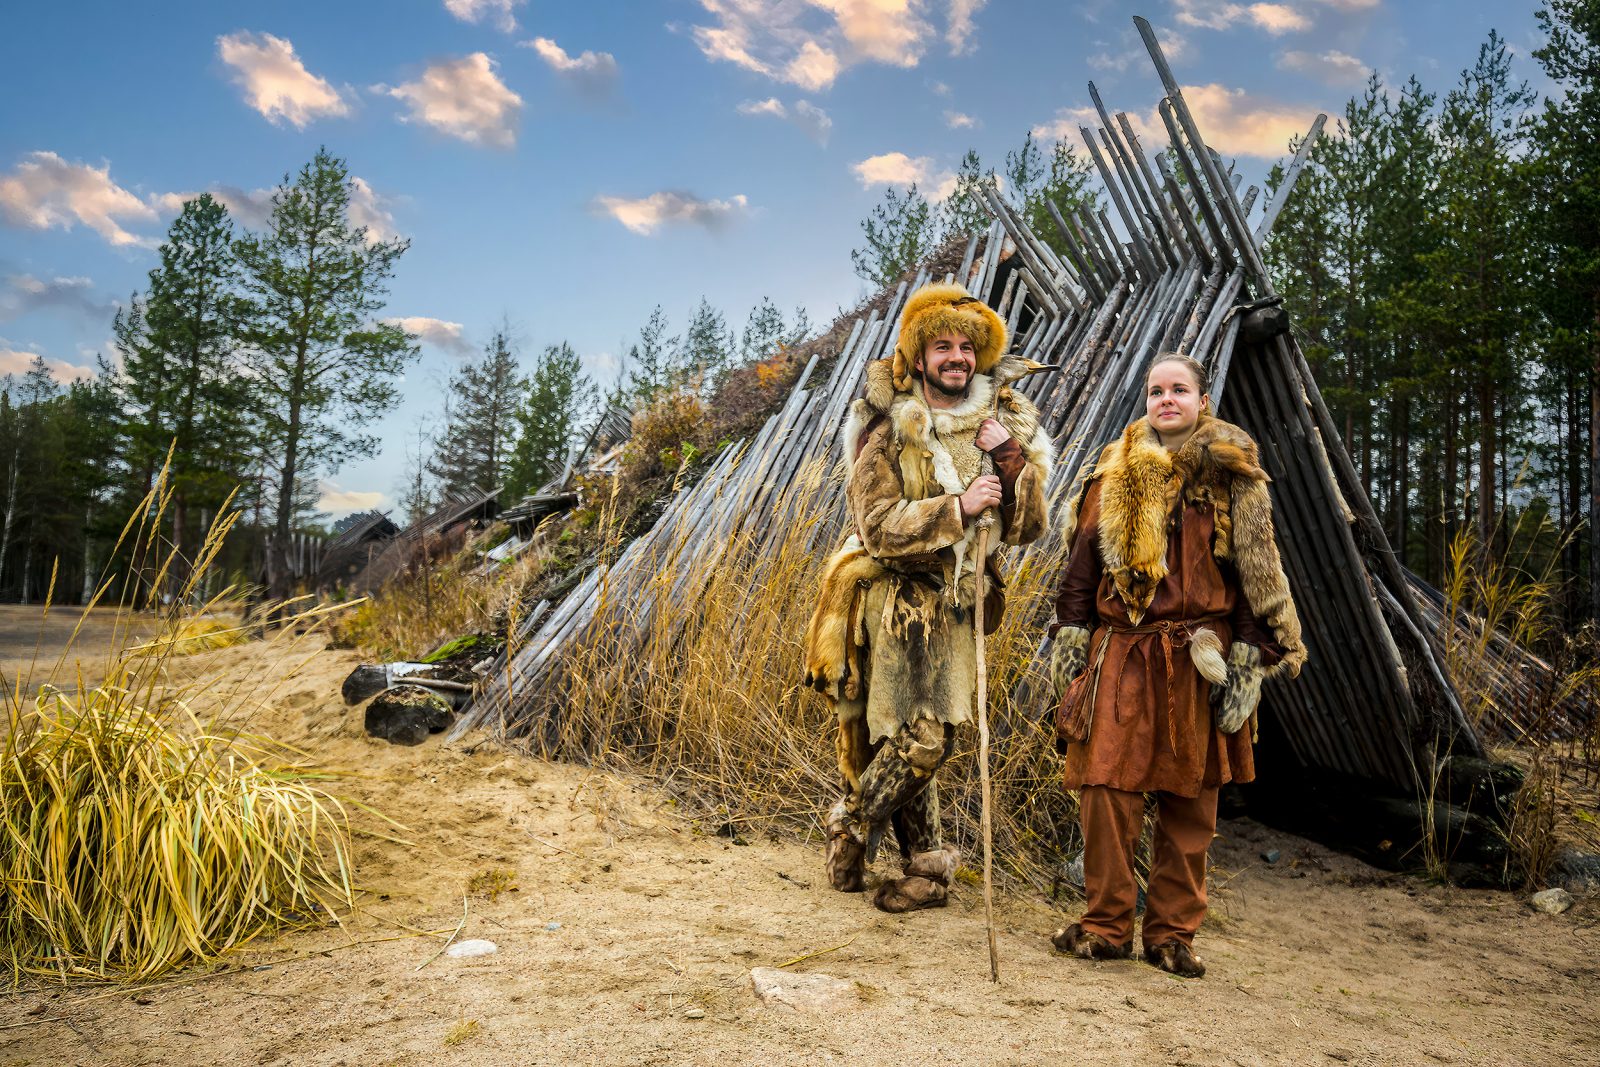 Workers in Stone Age costumes standing in front of the dwelling.